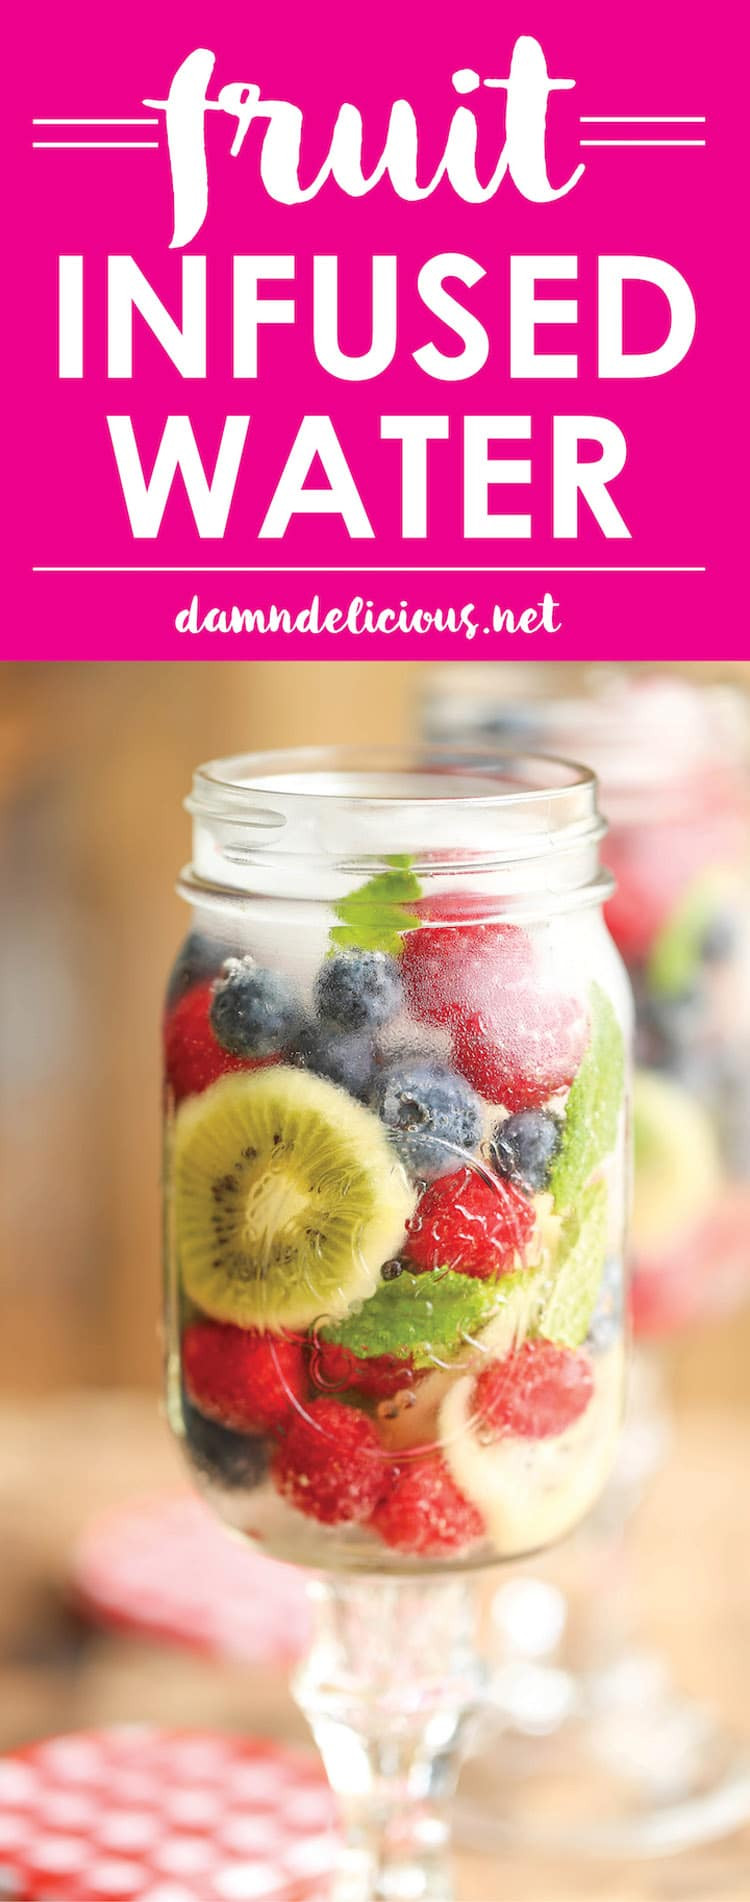 Infused Water Recipes For Weight Loss
 55 Summer Fruit Infused Water Recipes For Weight Loss